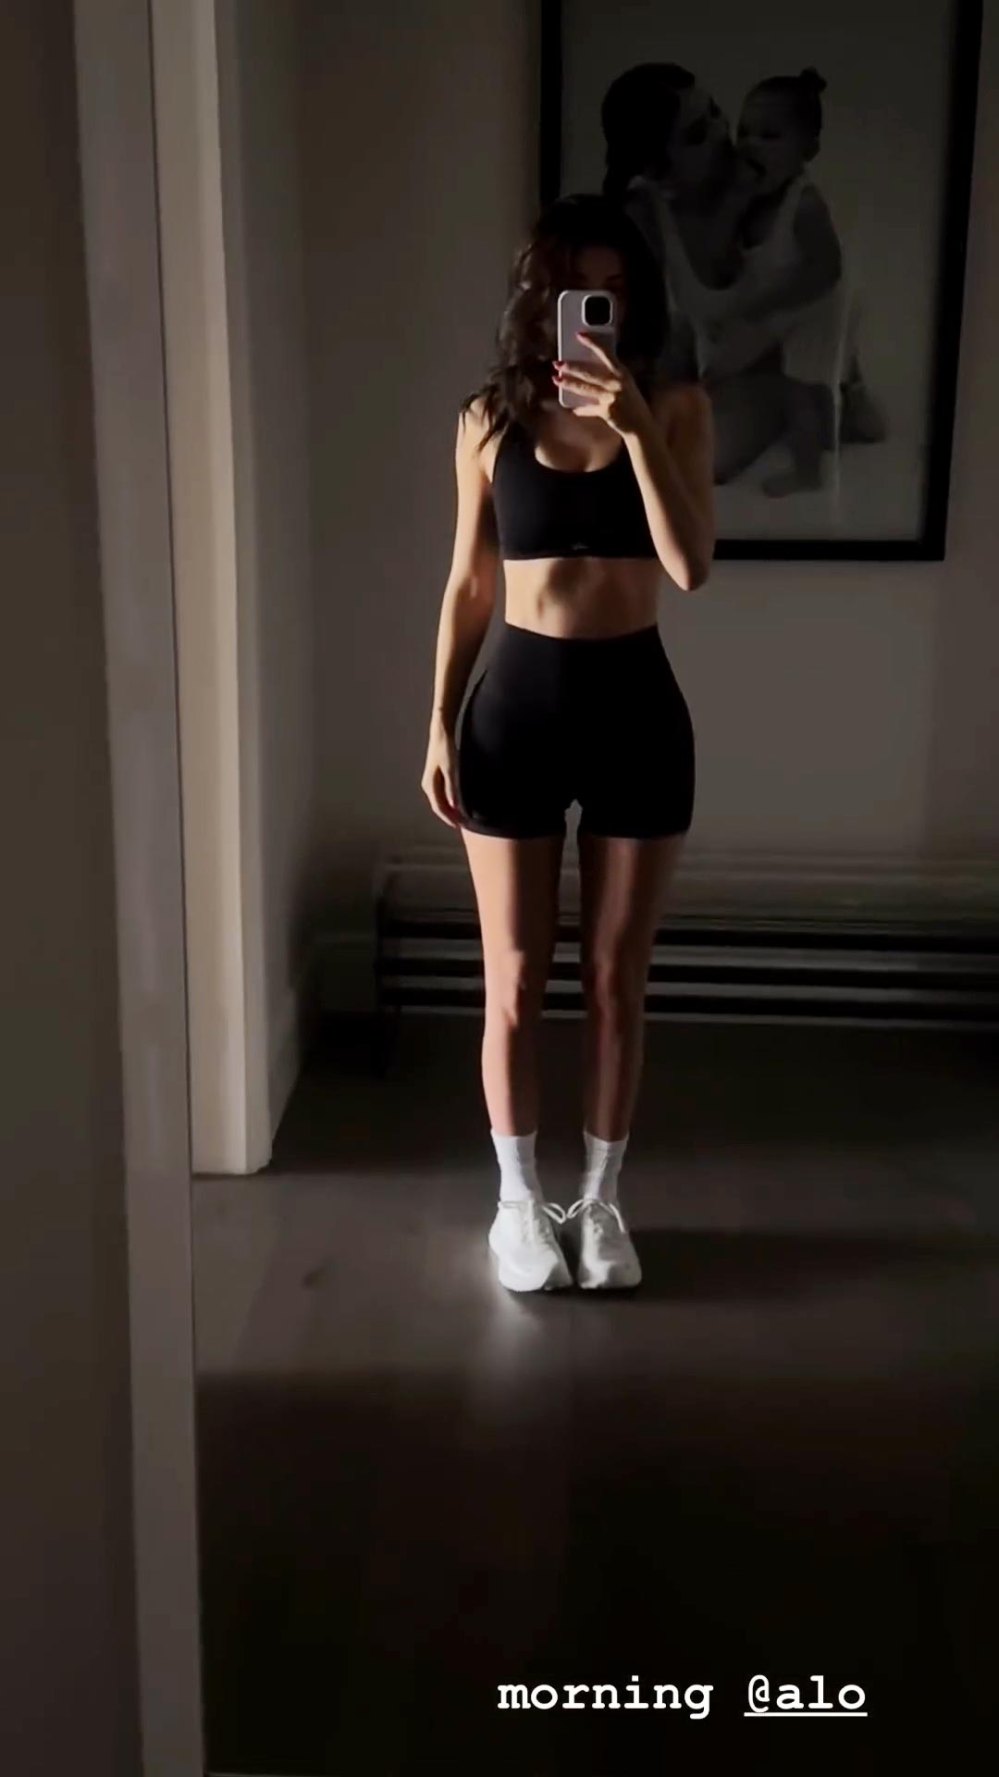 Kylie Jenner showed off her toned body wearing a sports bra and leggings measuring 168cm.